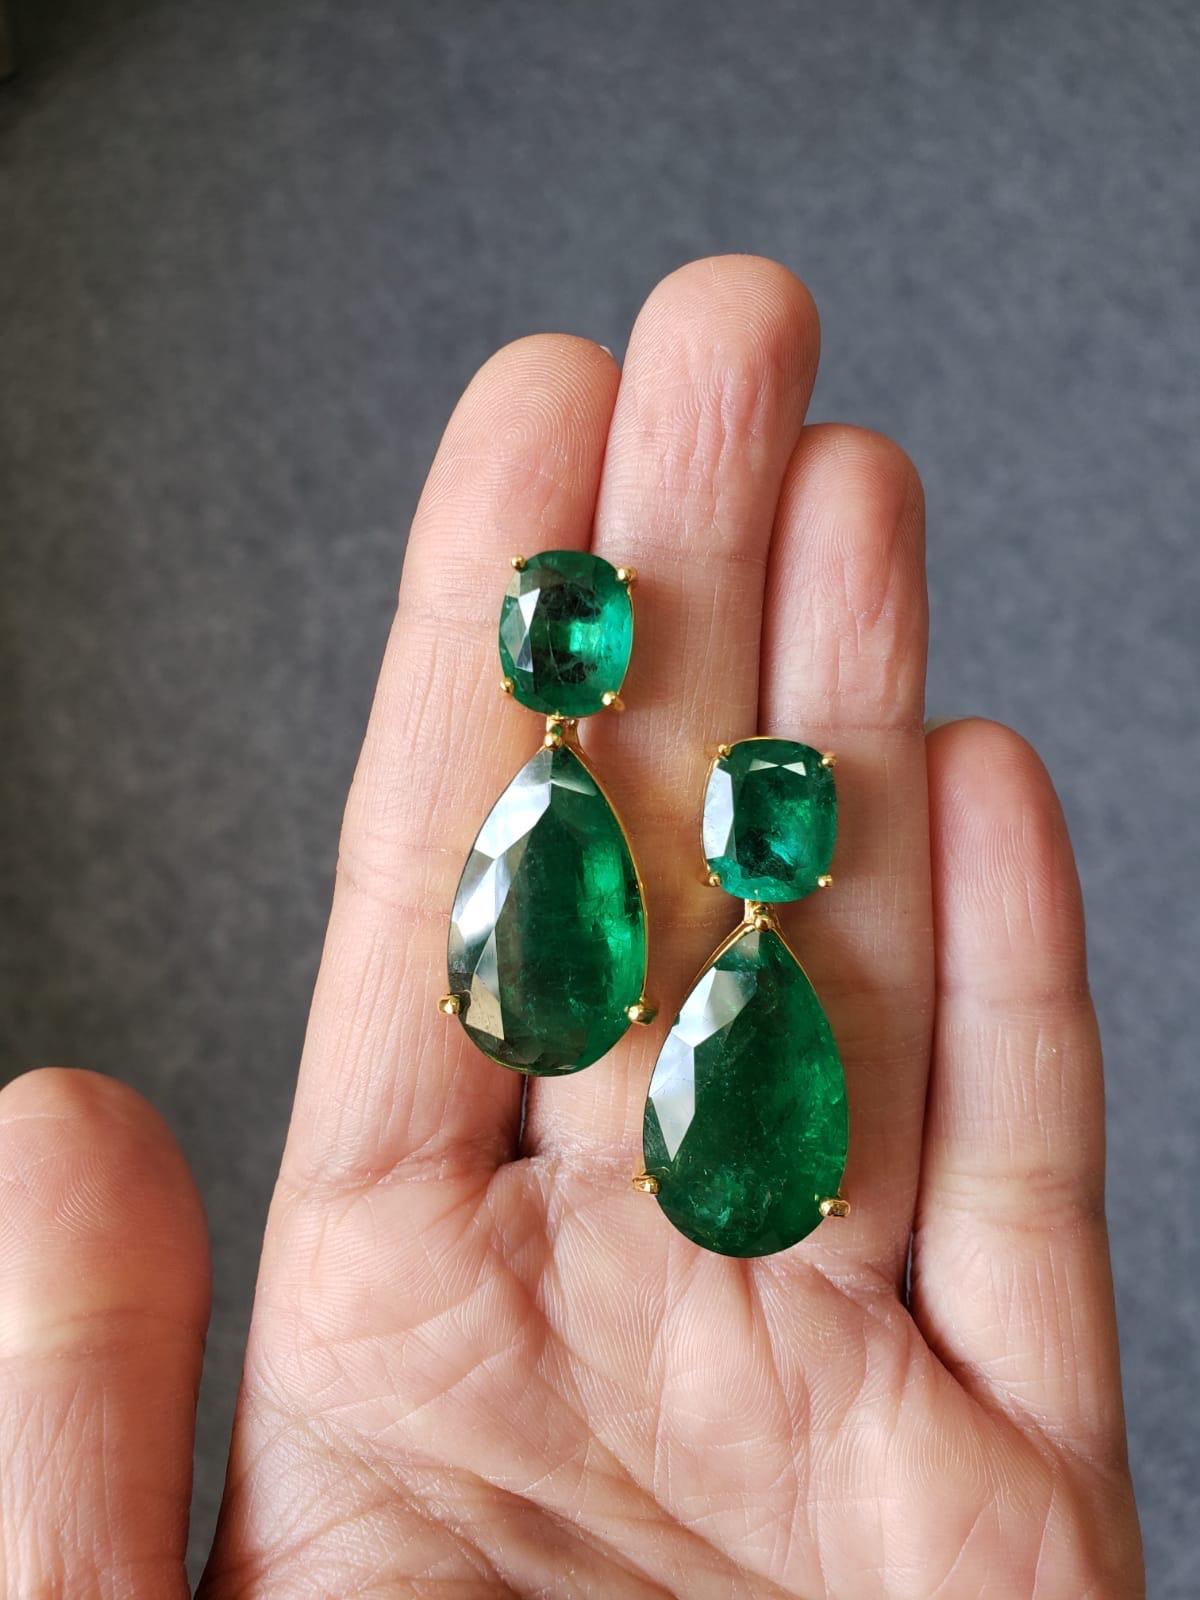 A stunning pair of 33.14 Carat , lustrous, transparent natural Zambian Emerald Pear Shapes with 8.00 Carat Cushion Shapes studs, with a push and pull backing. These beautiful emeralds have no chemical / dye, are absolutely natural - and they are set